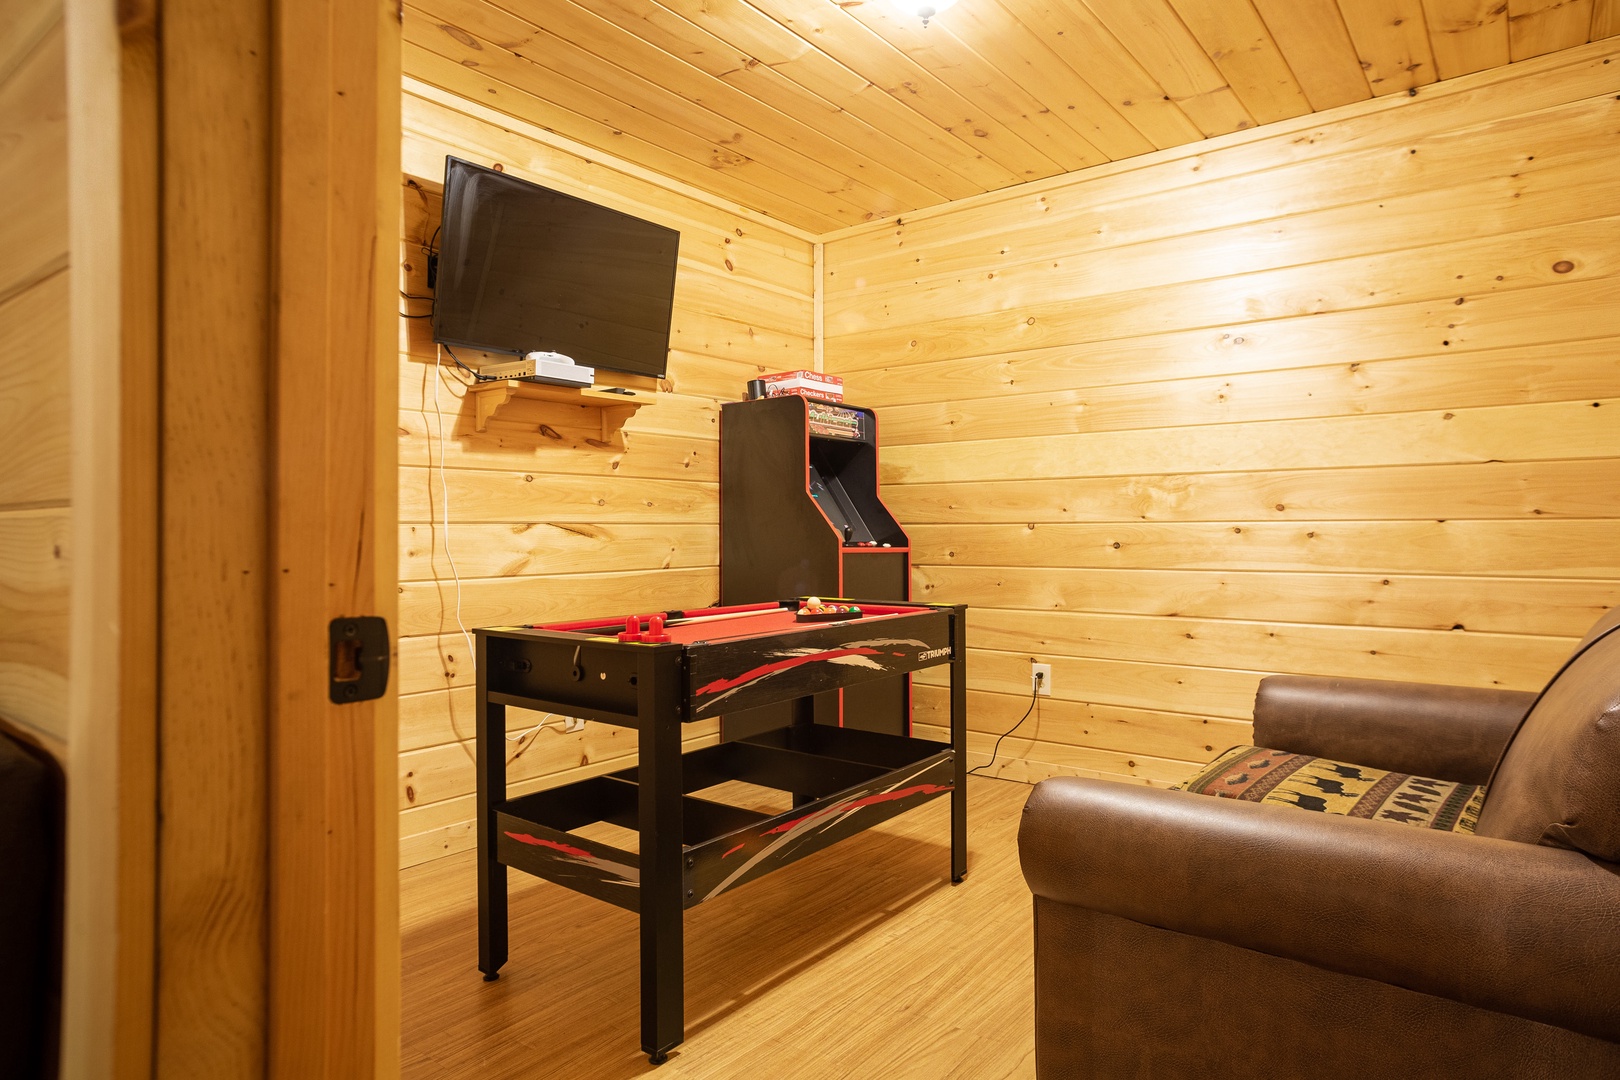 Arcade, TV, and Pool Table at 3 Crazy Cubs, a 5 bedroom cabin rental located in pigeon forge